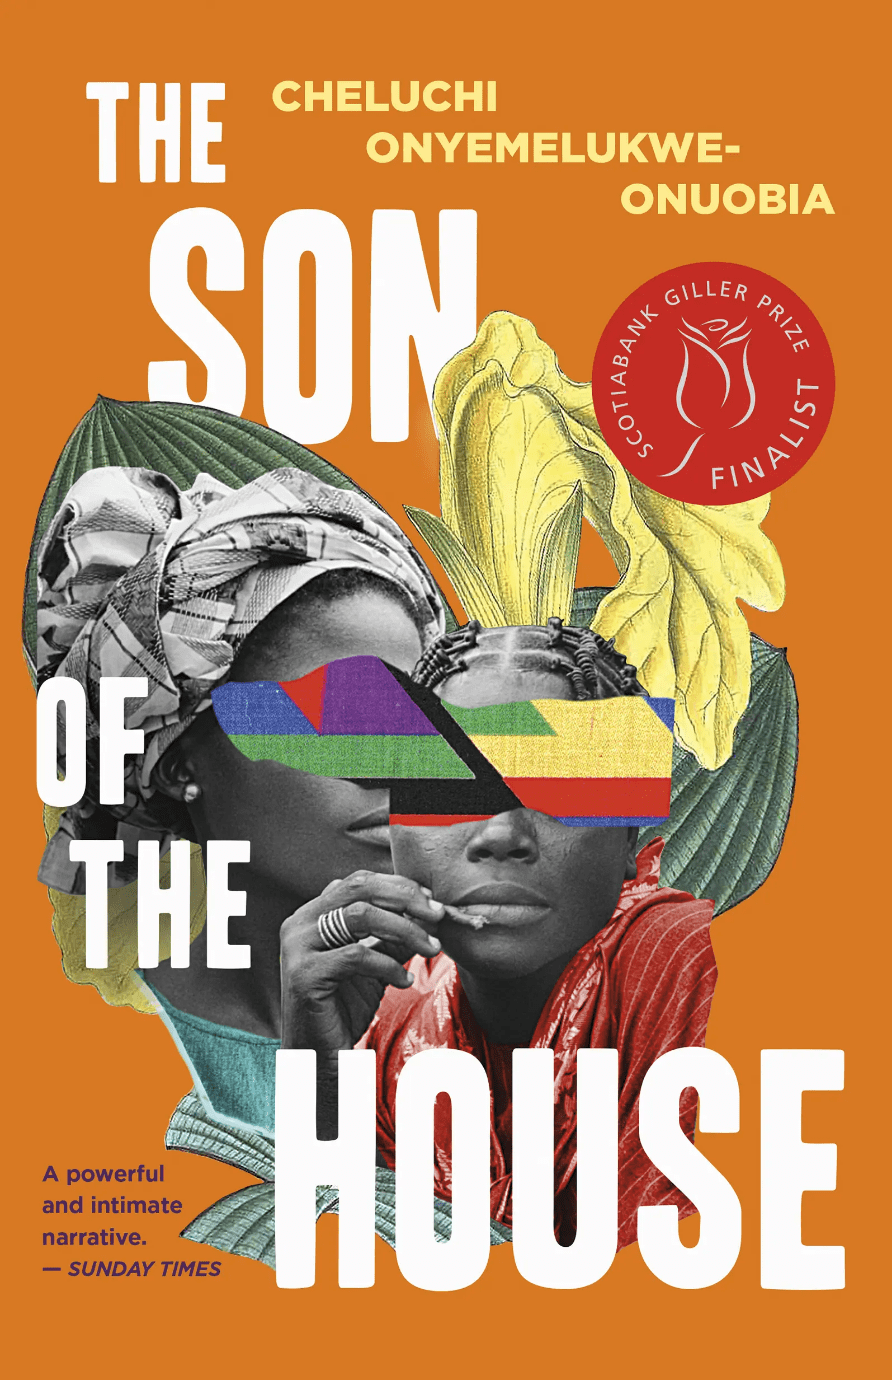 The Son of The House Book Cover